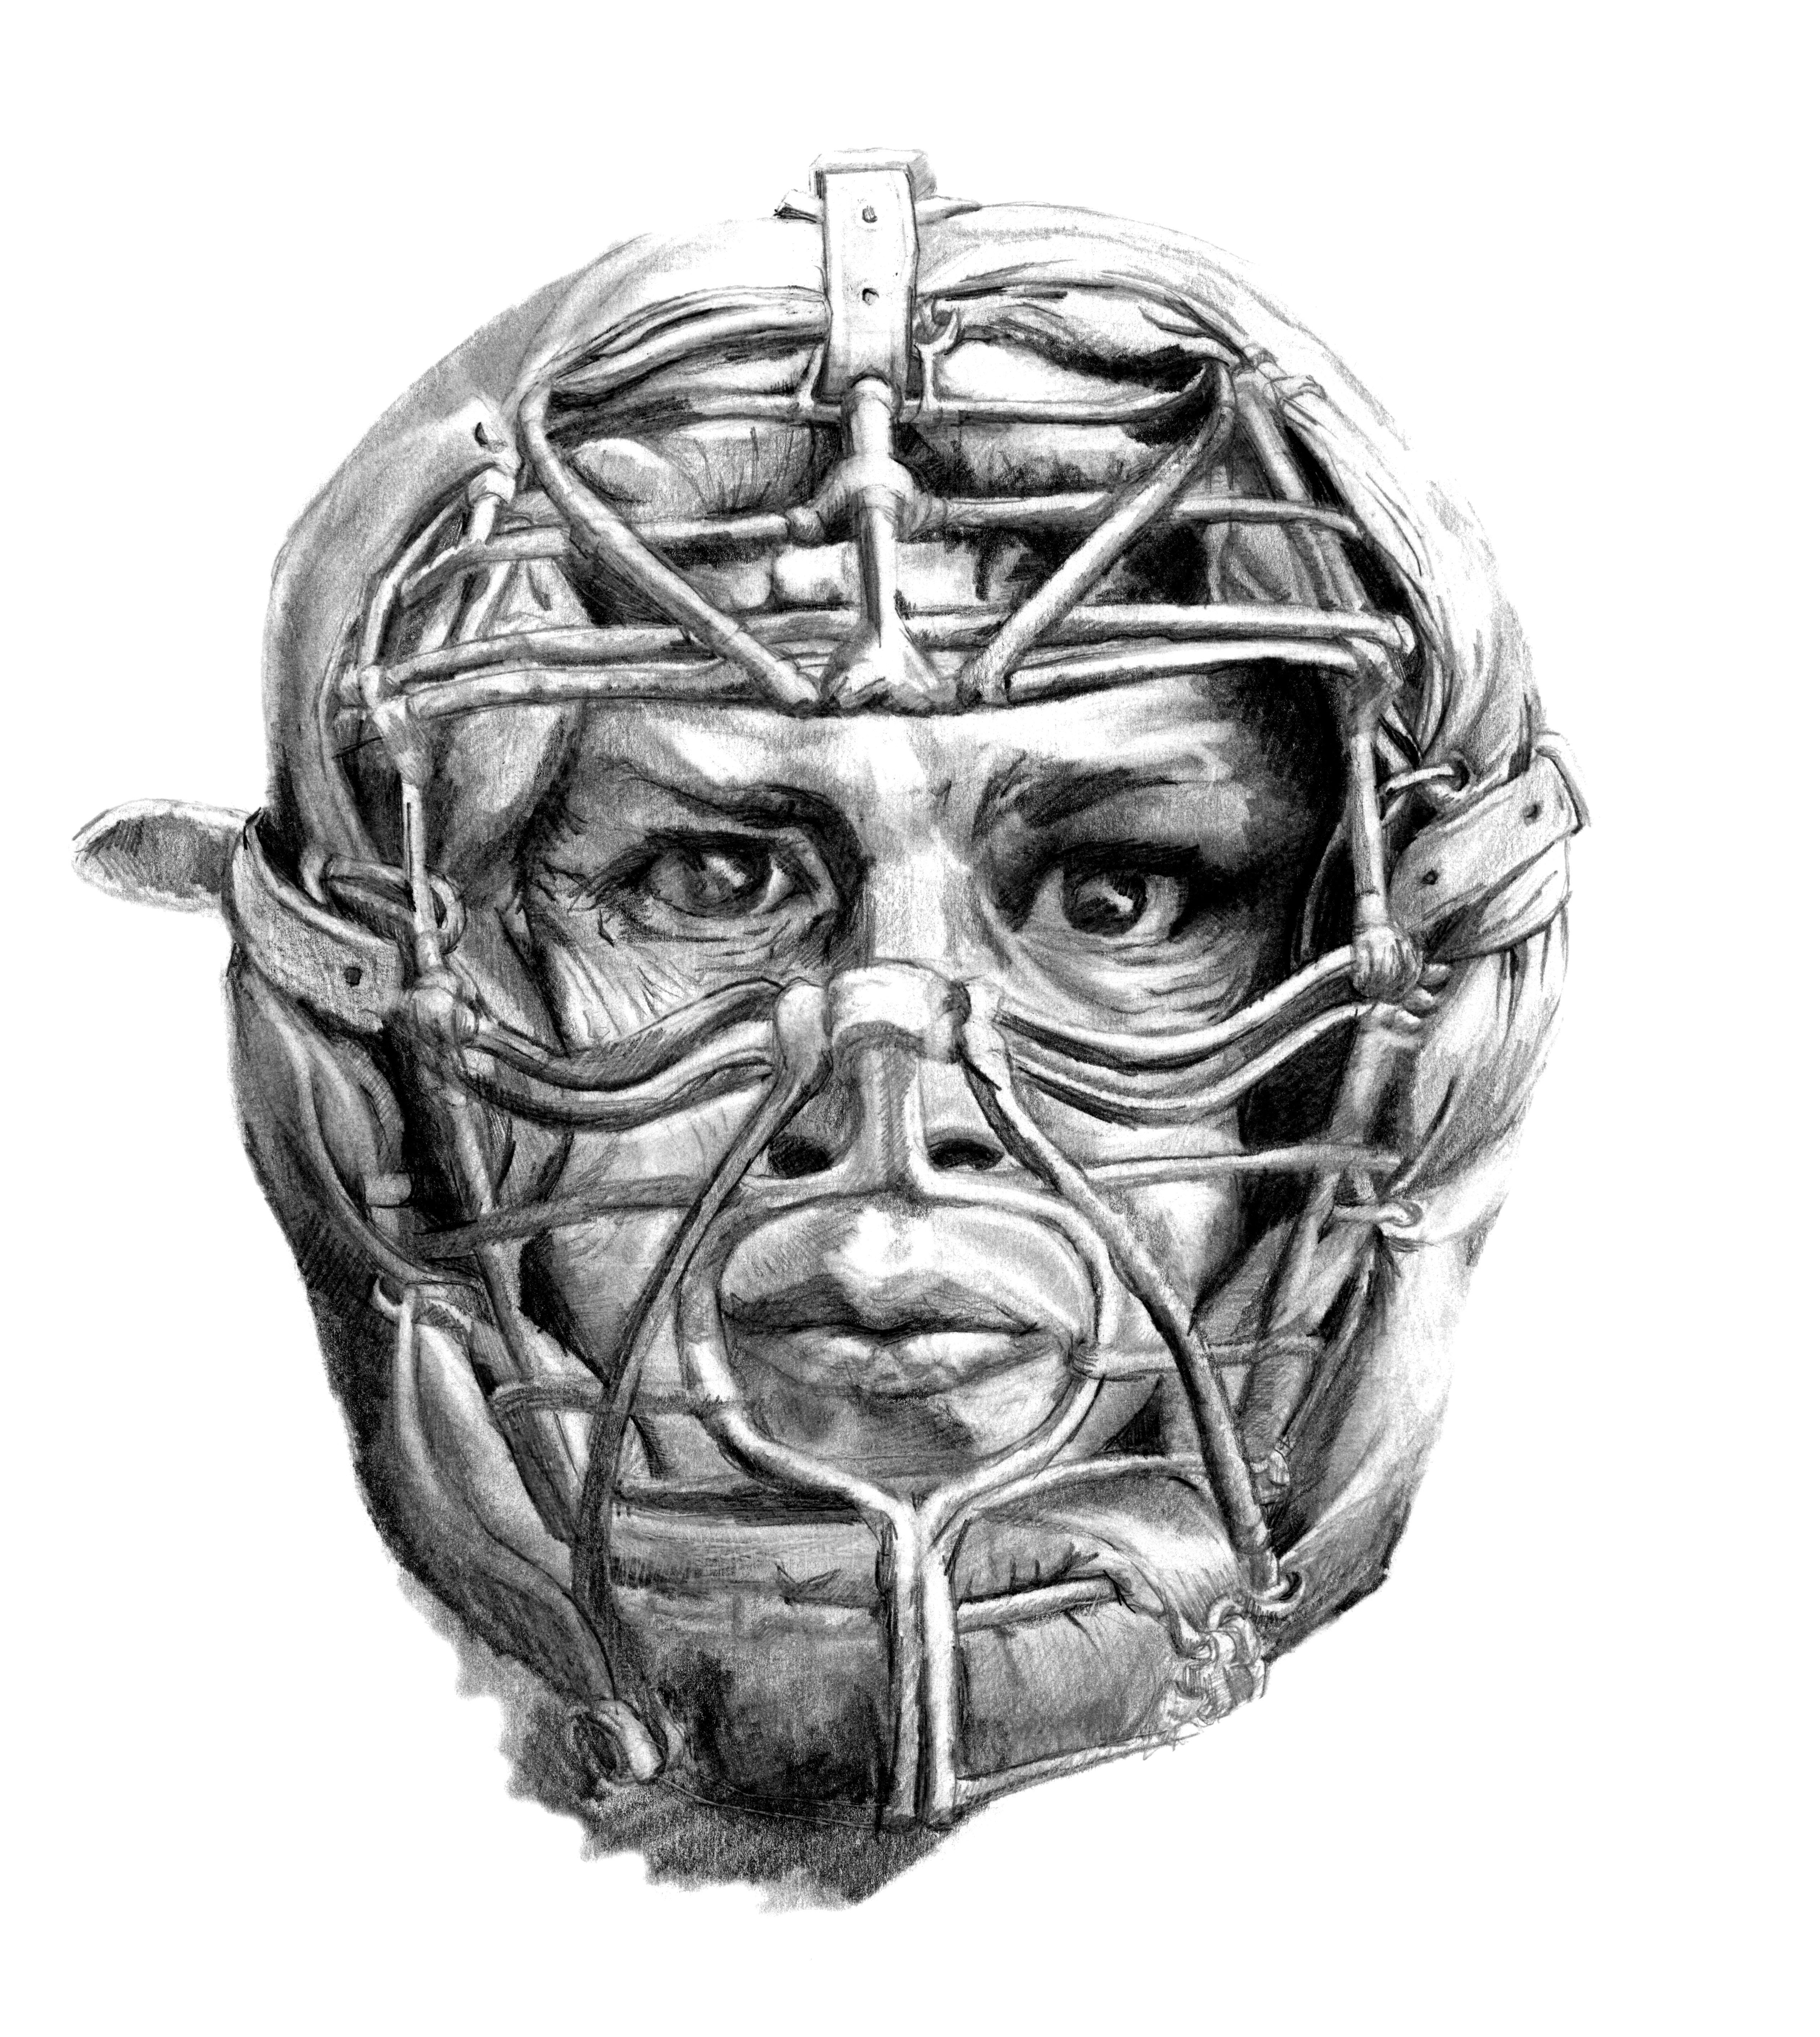 Margie Lawrence Figurative Painting - Chief Meyer - New York Giants Baseball Player Portrait in Catchers Mask